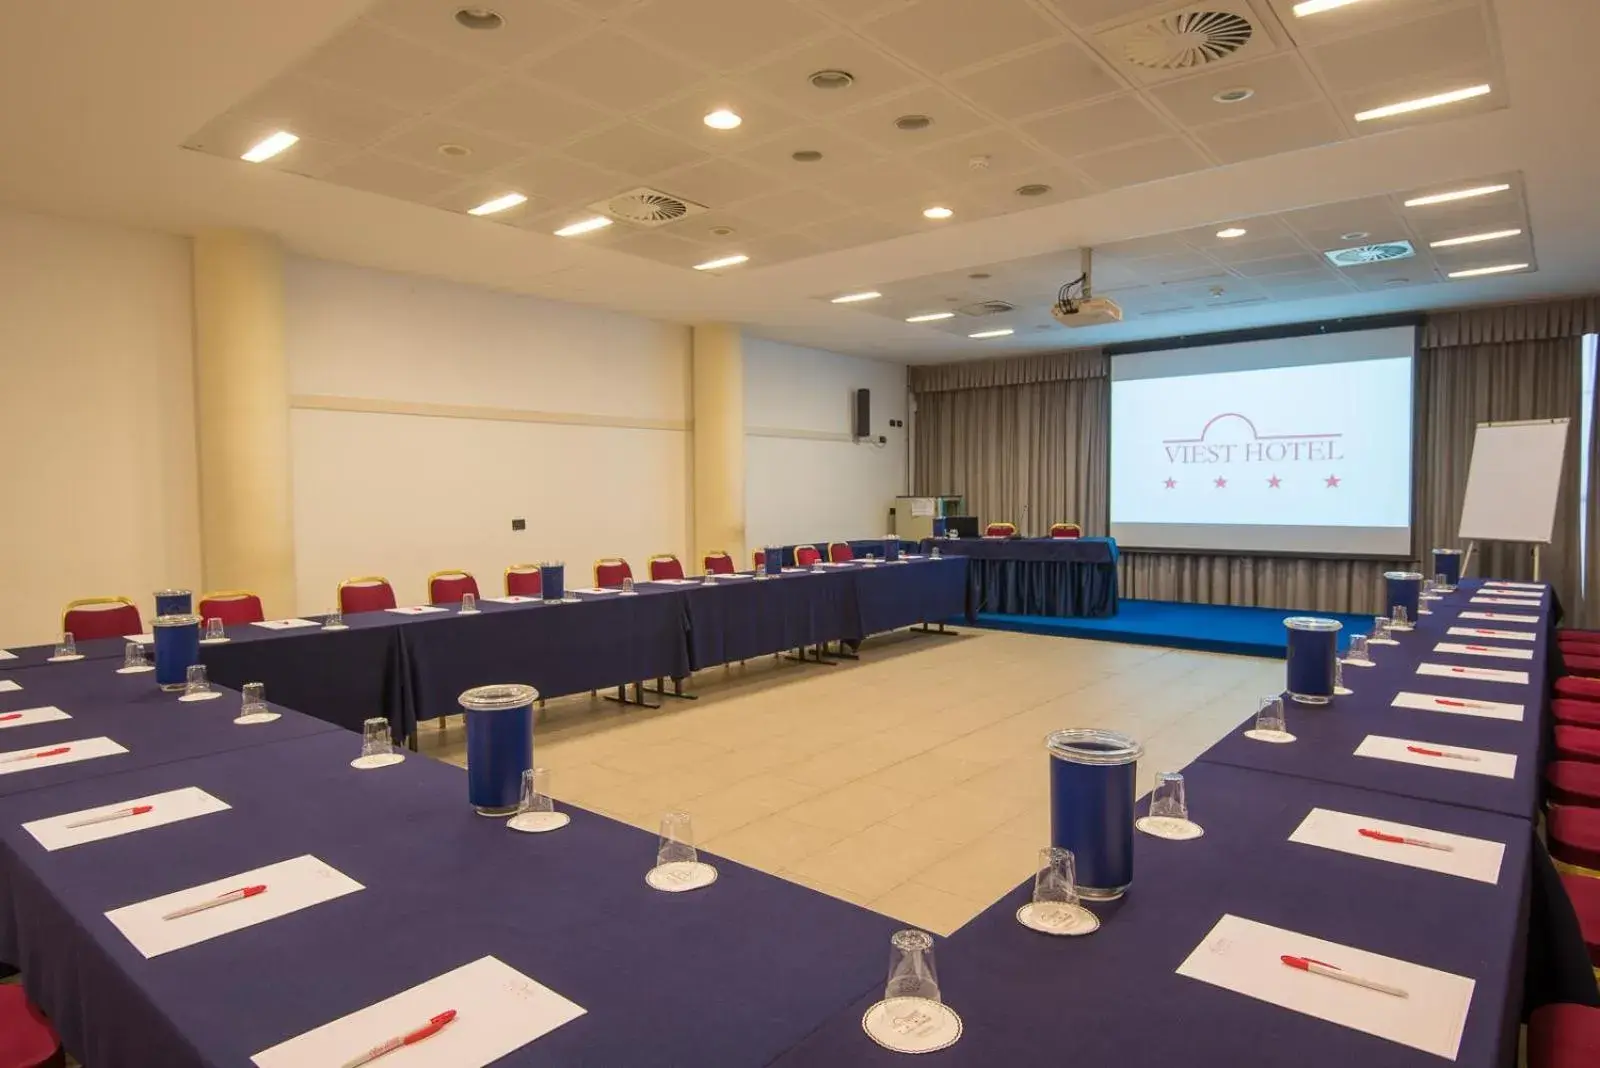 Meeting/conference room in Hotel Viest